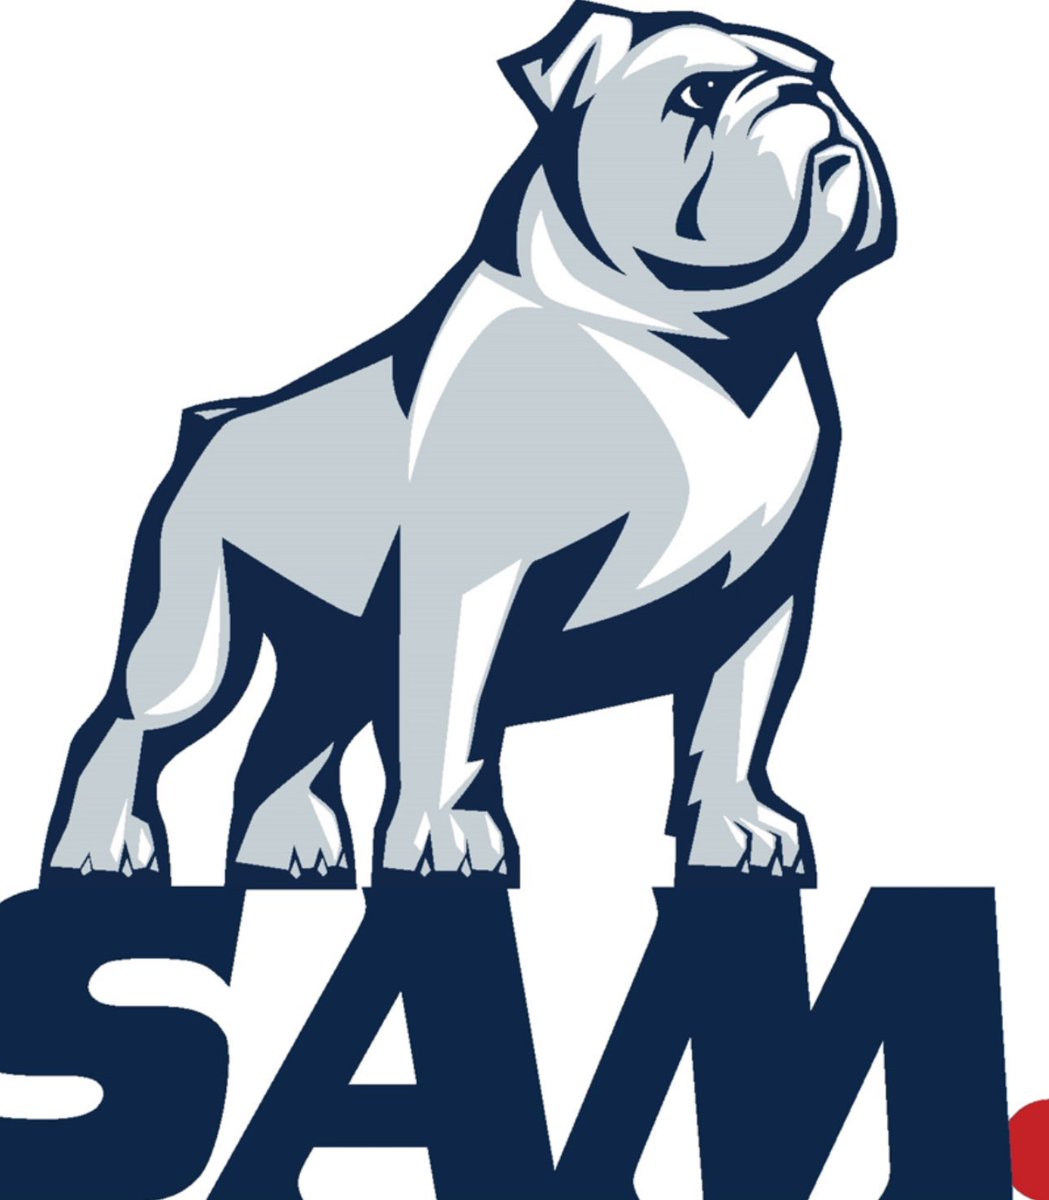 I’m blessed to receive an offer from @SamfordFootball. Thank you @RickyTurner19 for coming out to see me practice and to meet my parents!! @RecruitLambert @deucerecruiting @CoachDaniels06 @JeremyO_Johnson @ChadSimmons_ @MohrRecruiting @One11Recruiting @TheUCReport @Rivals